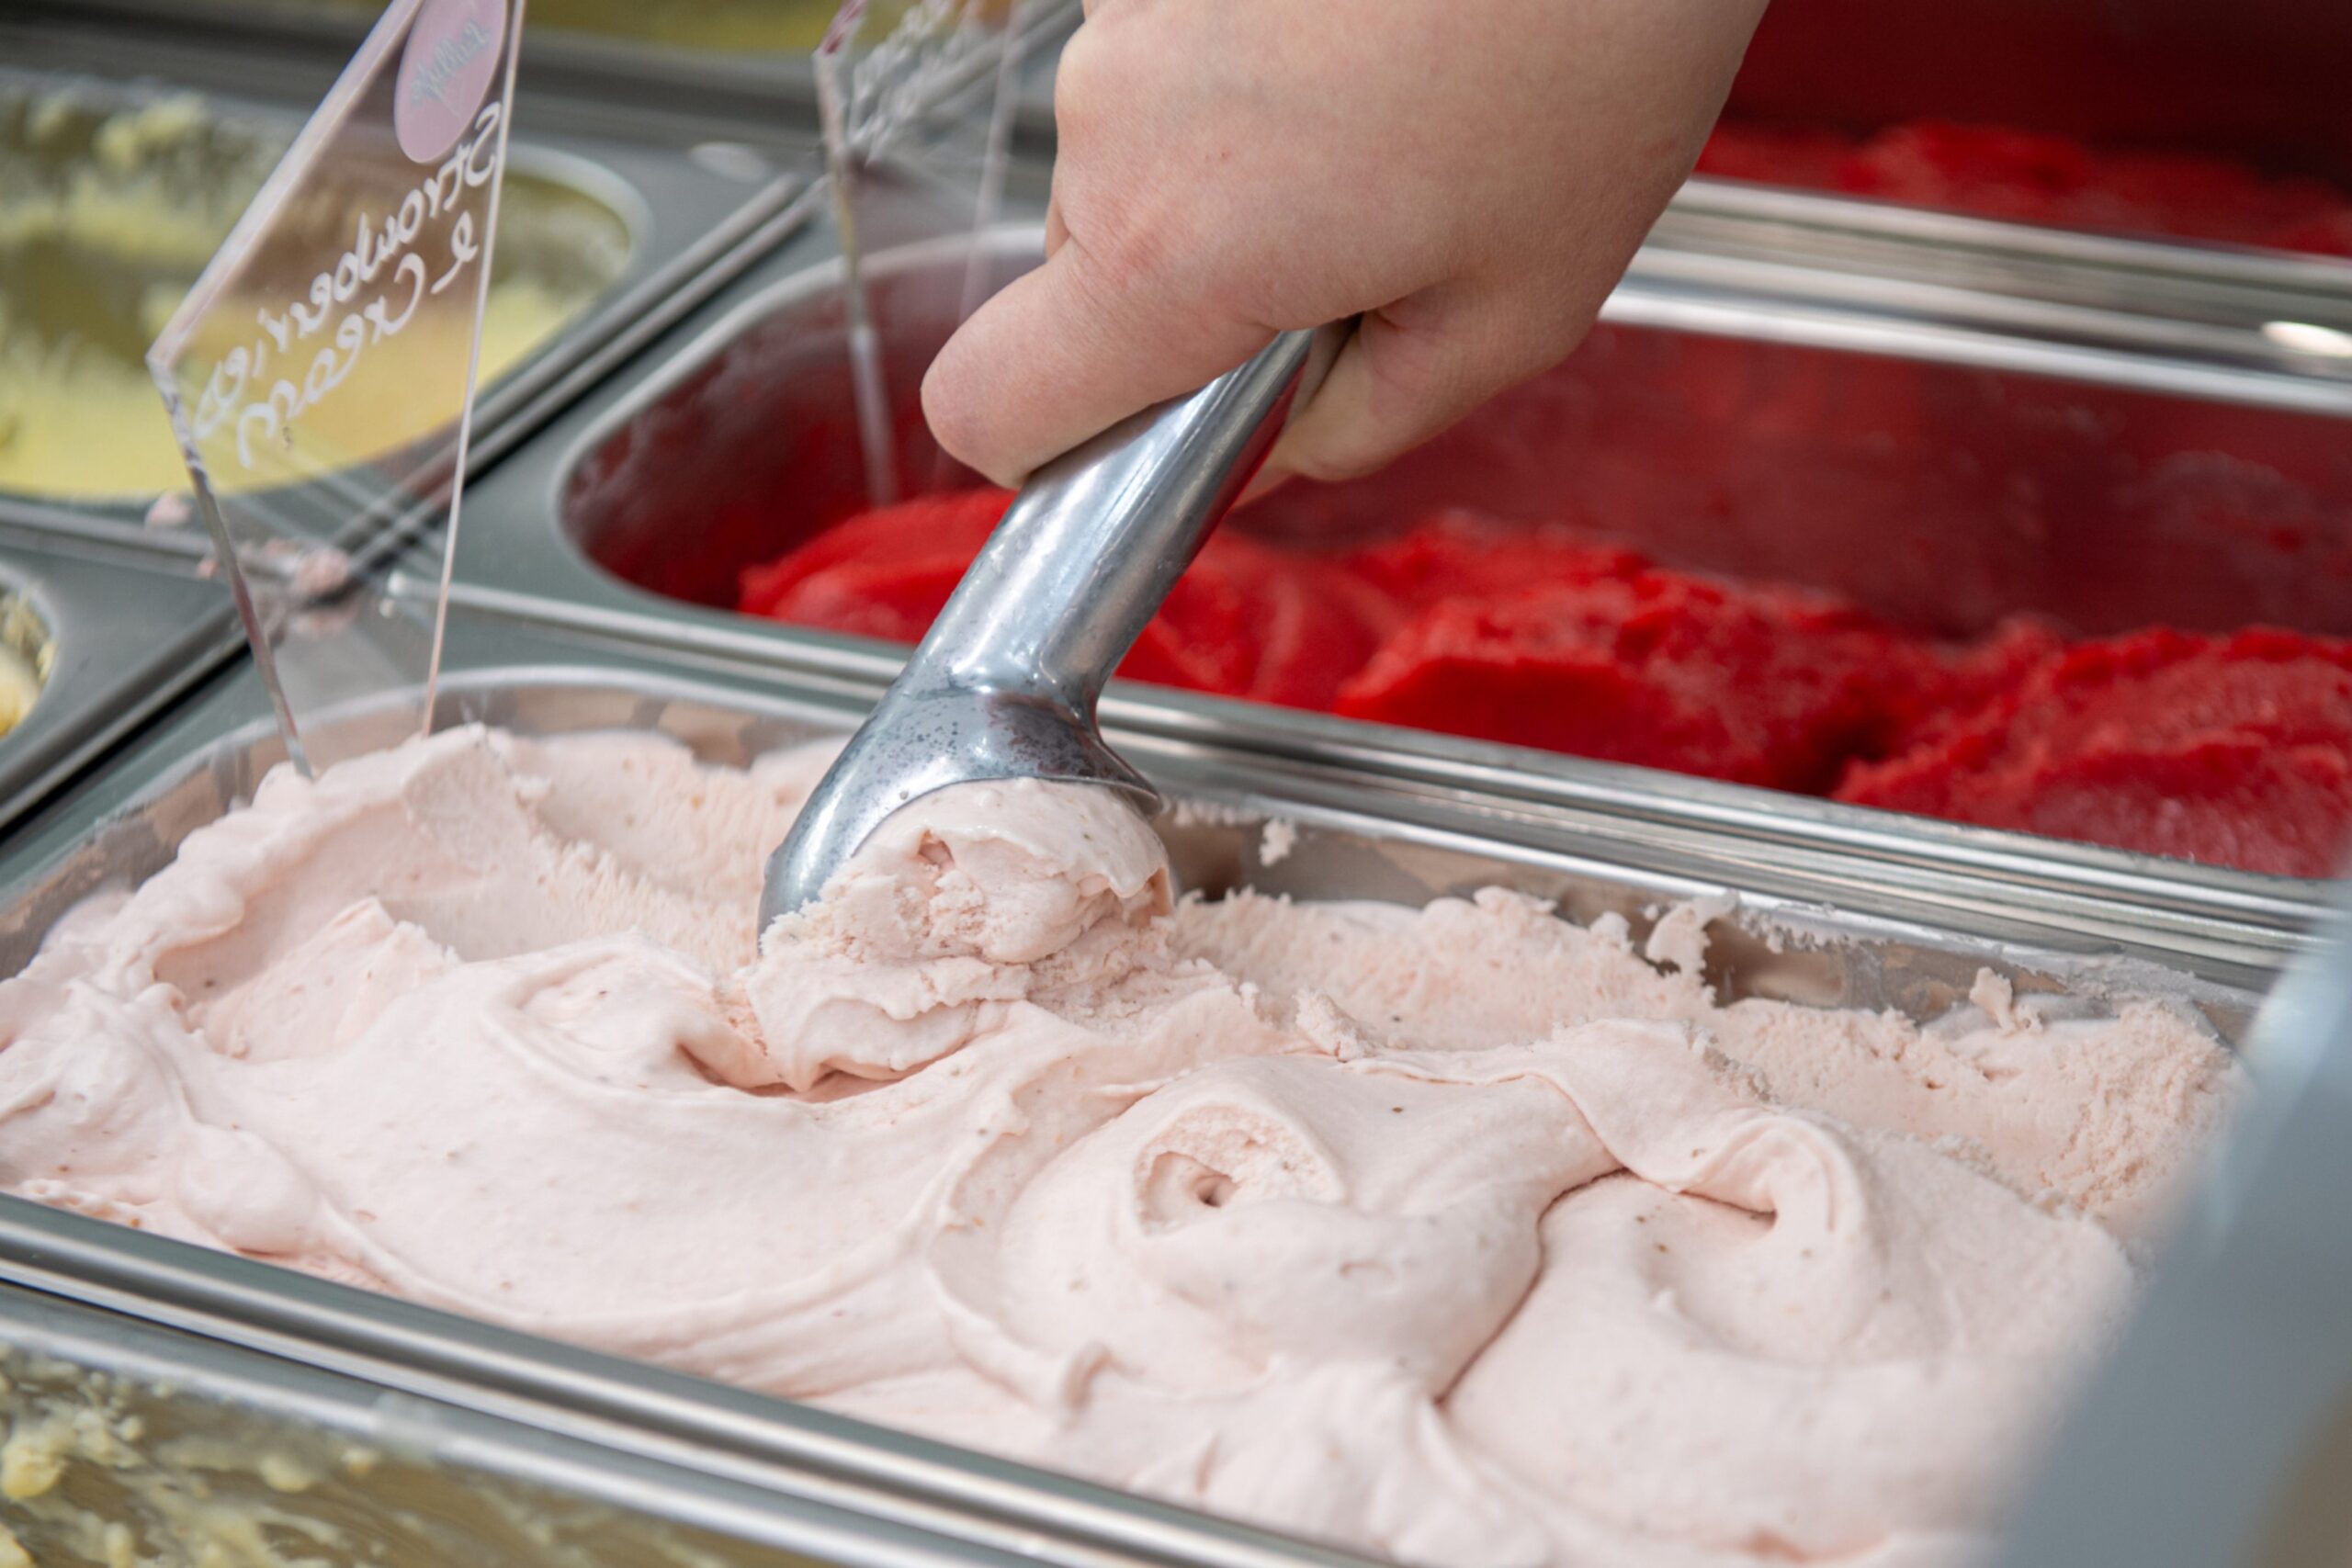 Strawberry and cream ice cream being scooped